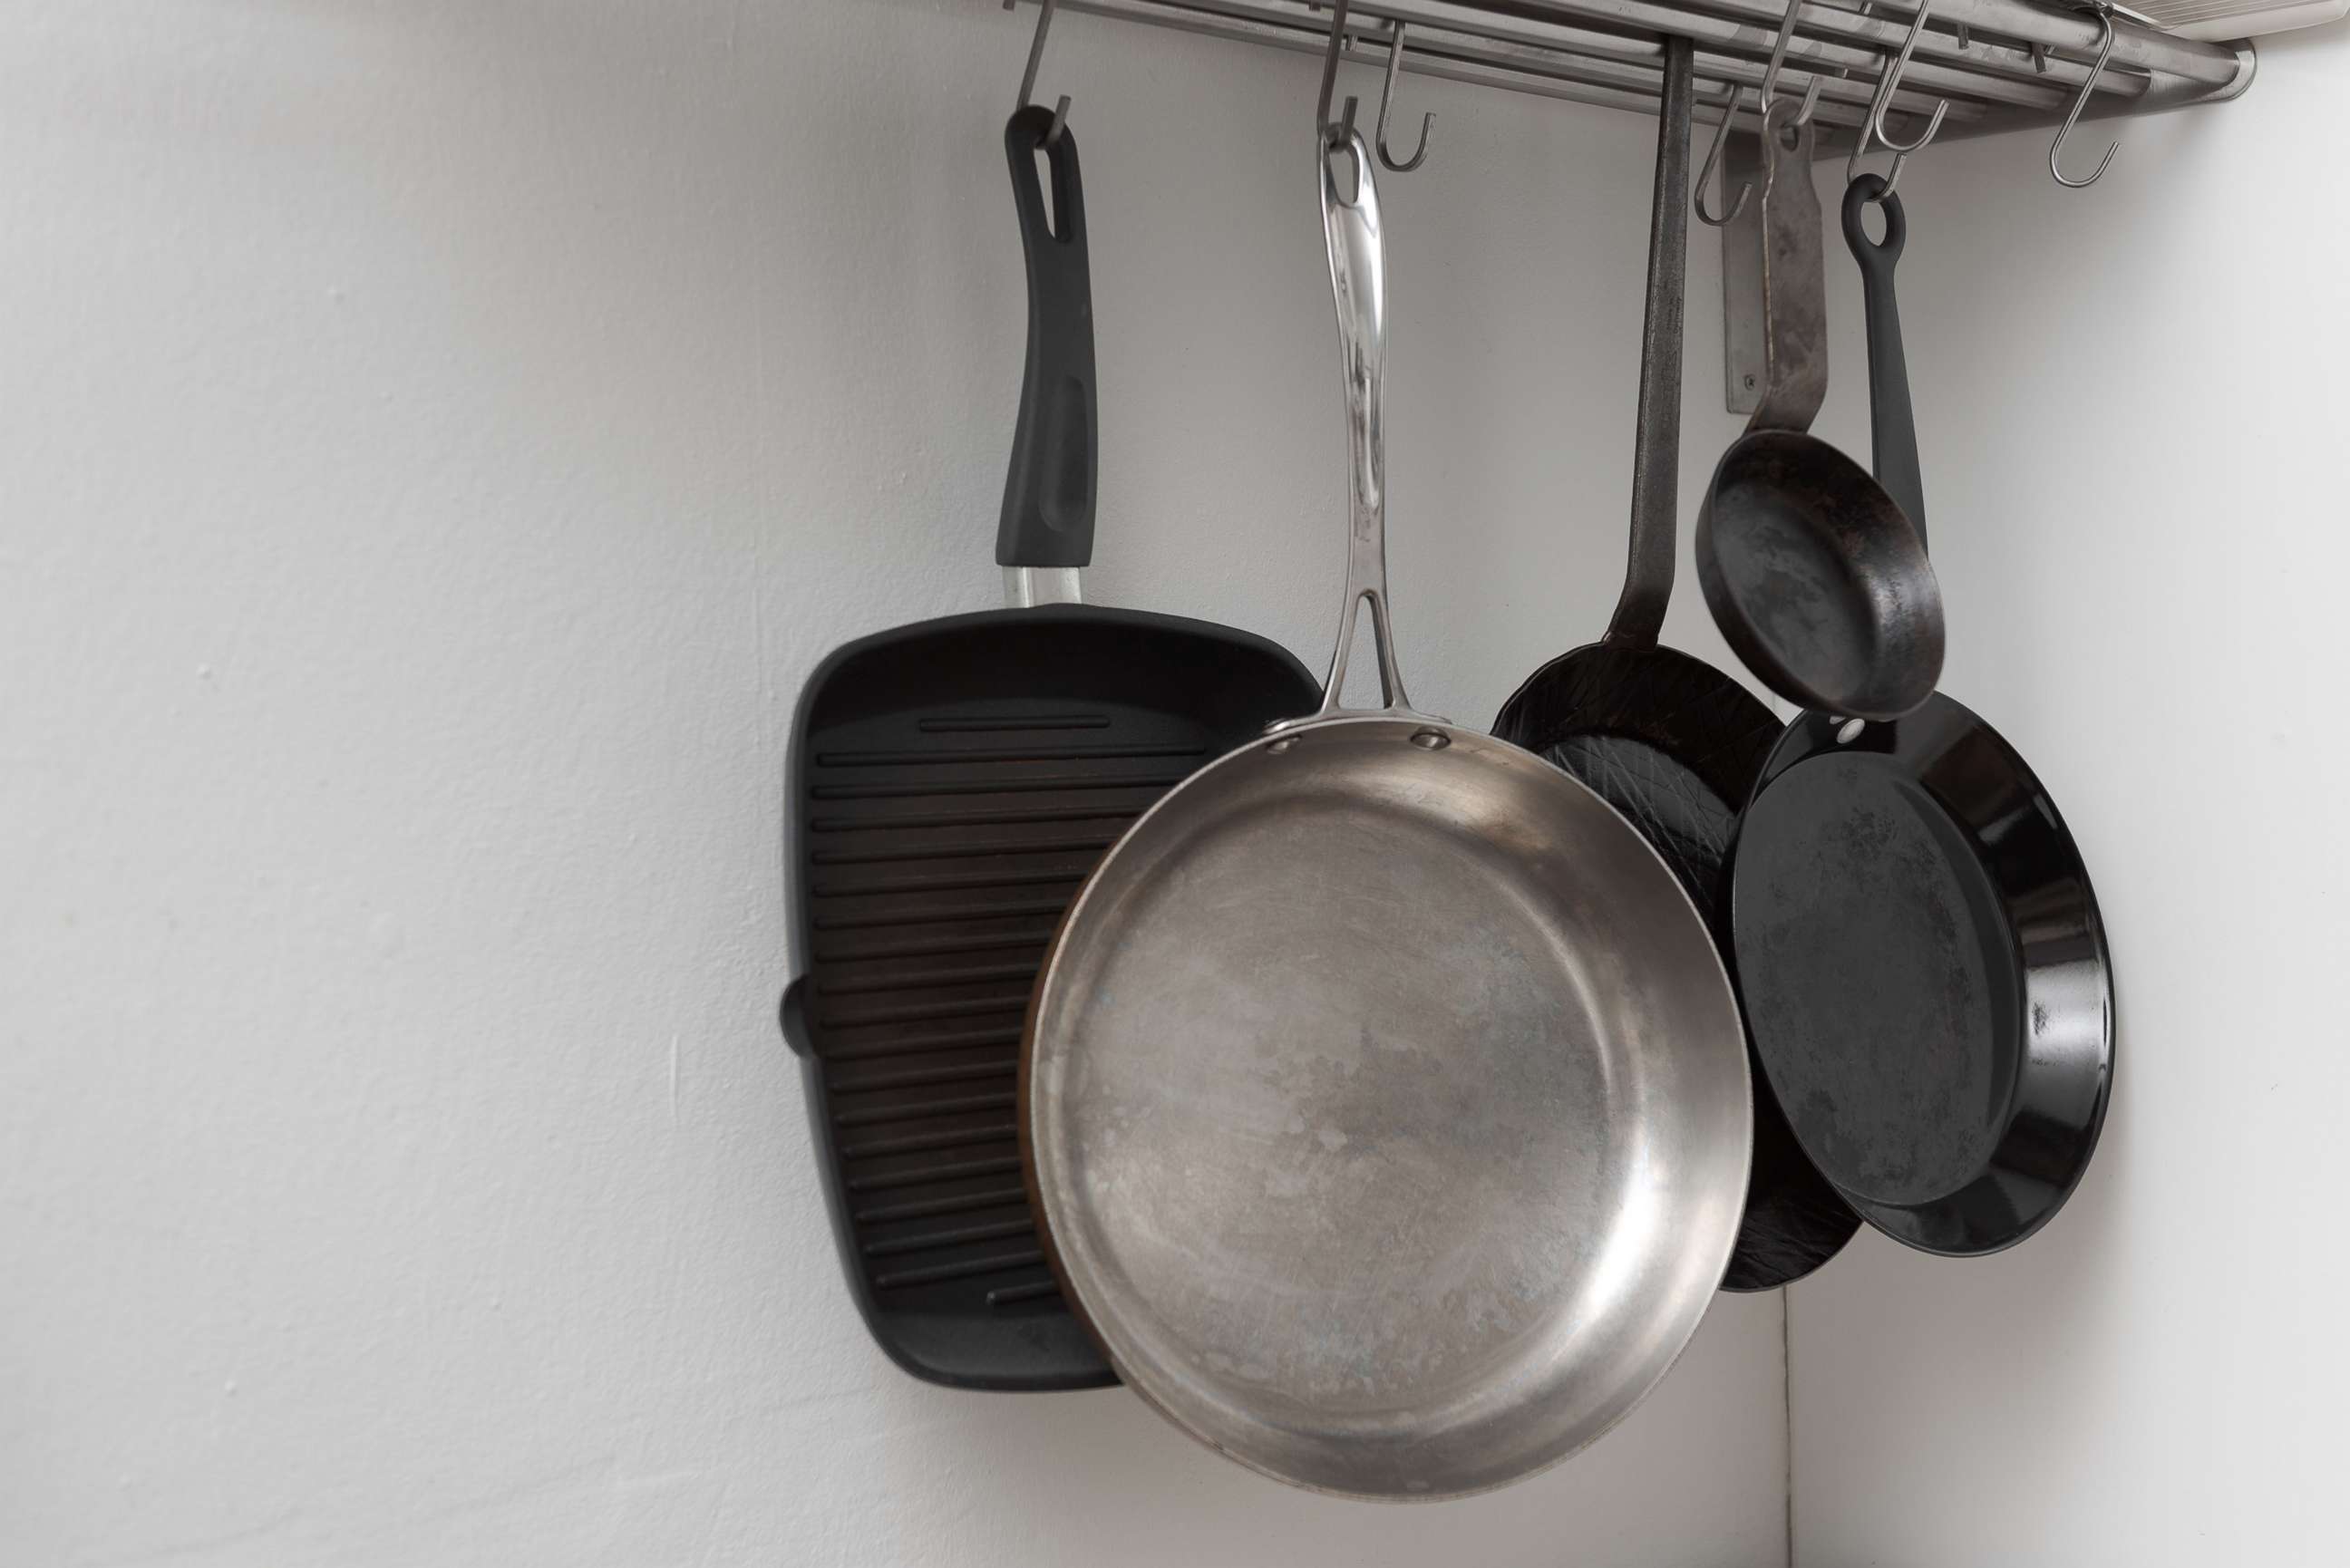 PHOTO: Pans are seen in an undated stock photo.